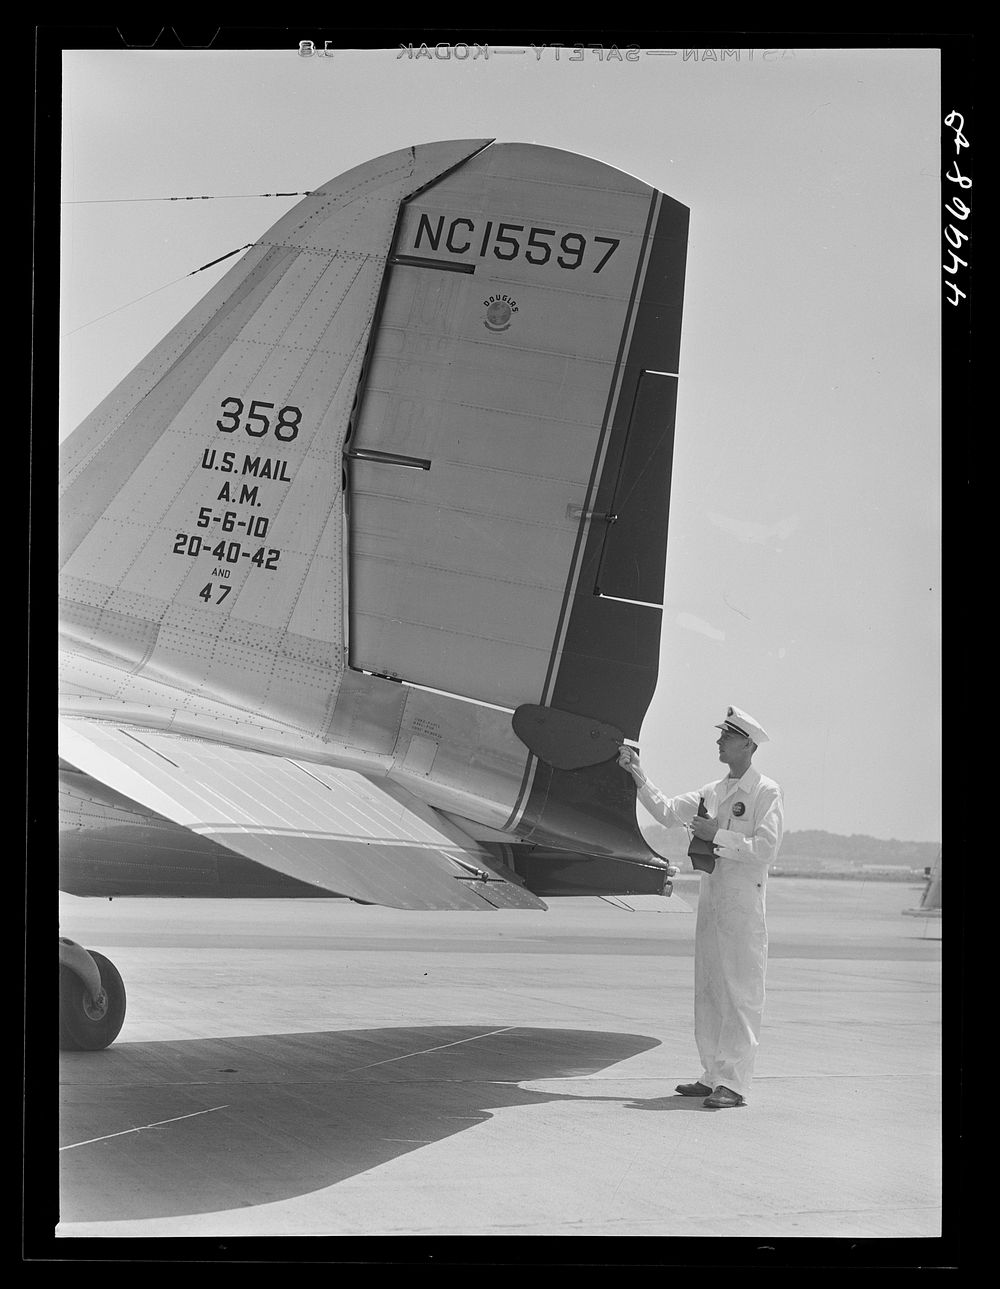 A ground crew assistant removing the block from the rudder preparatory to the plane's taking off. Municipal airport…